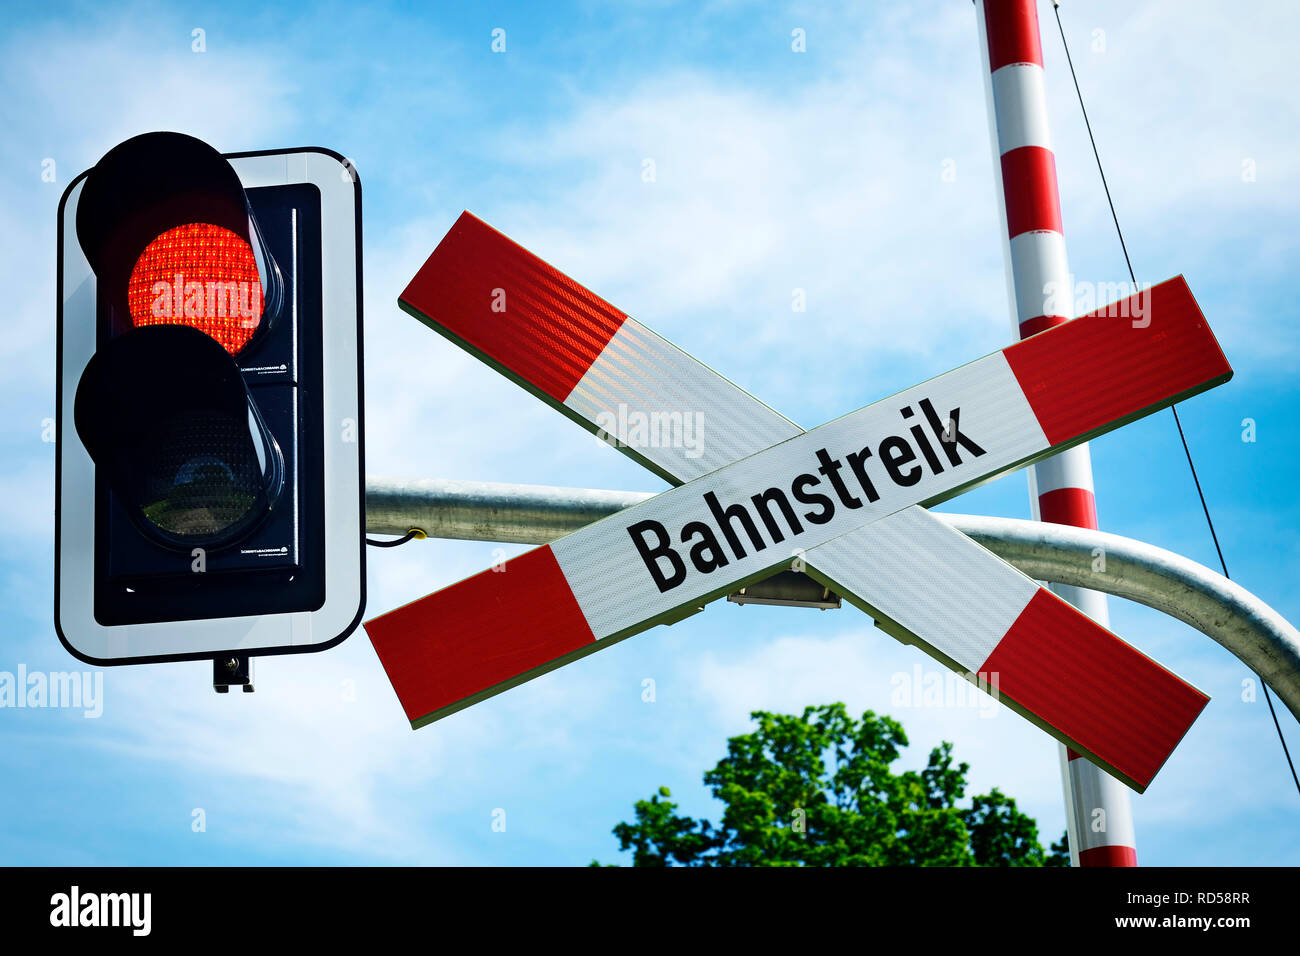 Level crossing with St Andrew's Cross and label Road strike, Photomontage, Bahnübergang mit Andreaskreuz und Aufschrift Bahnstreik, Fotomontage Stock Photo